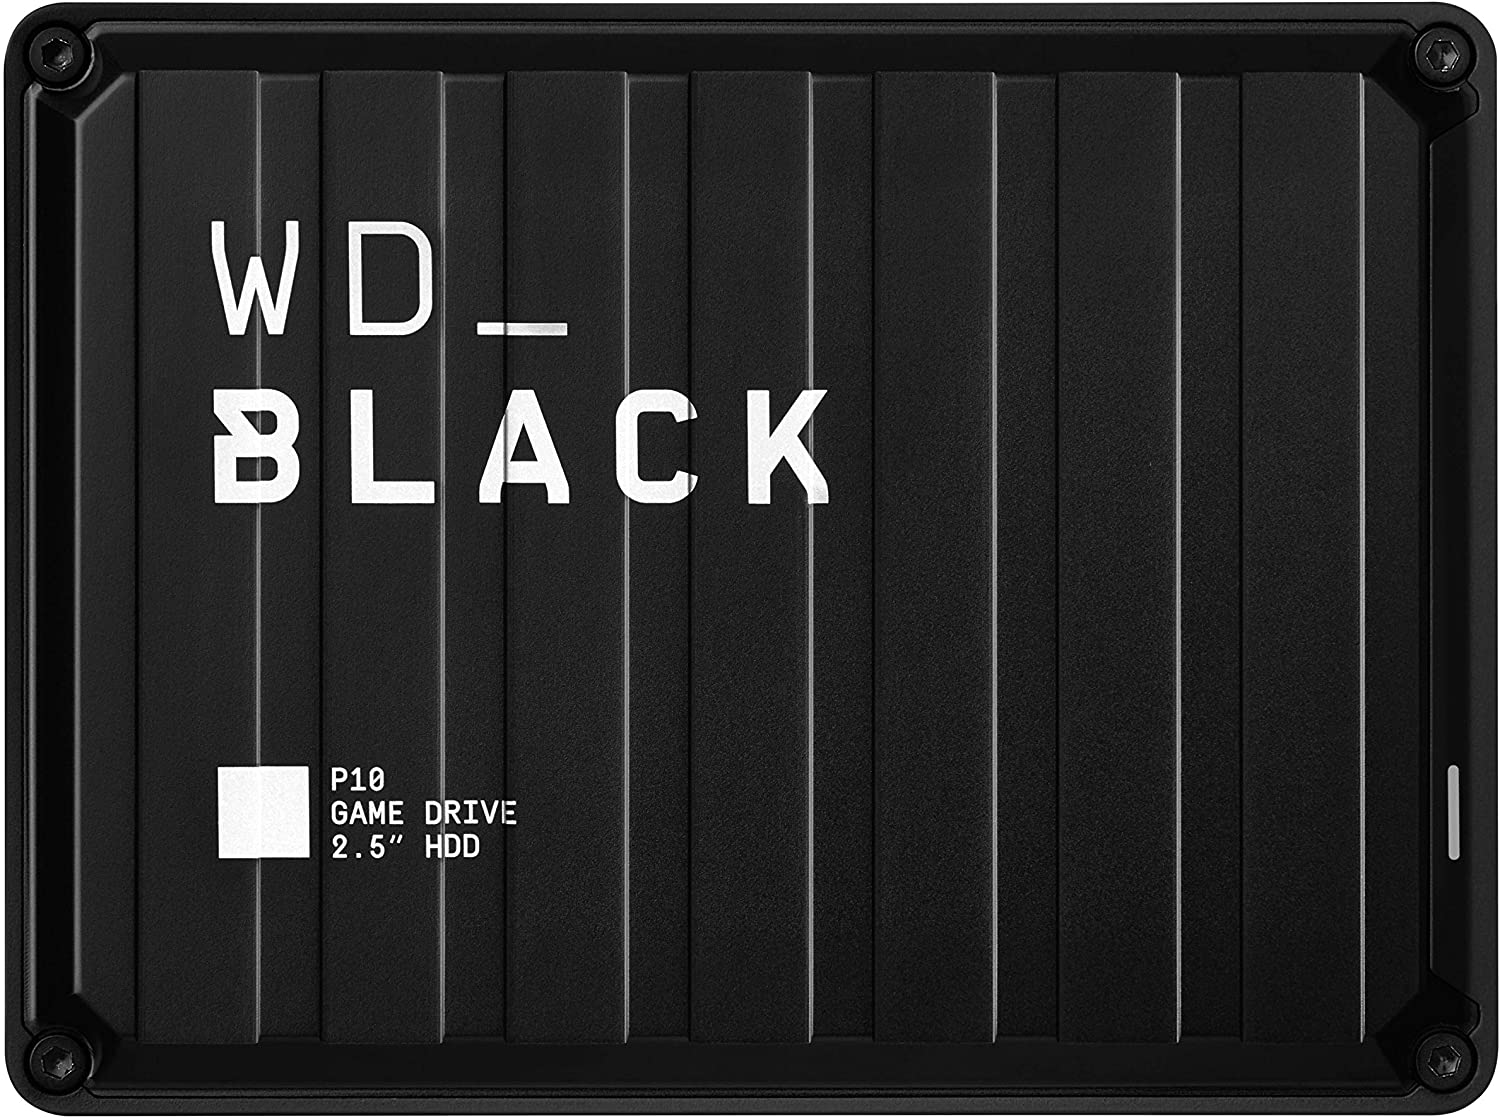 Deal of the day: WD_BLACK 5TB P10 Game Drive - Portable External Hard Drive HDD, Compatible with Playstation, Xbox, PC, & Mac - WDBA3A0050BBK-WESN - $99.99